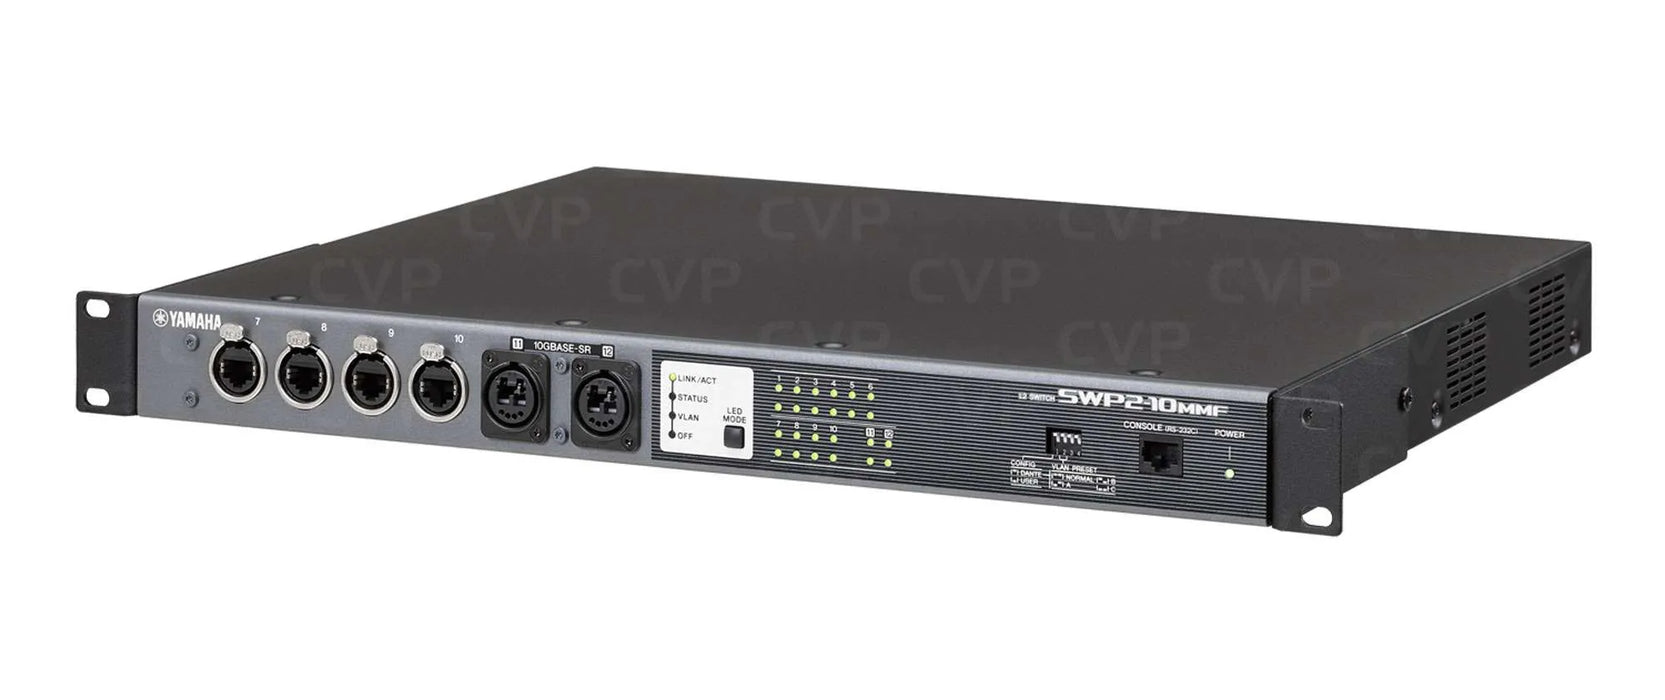 Yamaha SWP2-10MMF Network Switch With 10G Uplink And Multimode Fiber Port